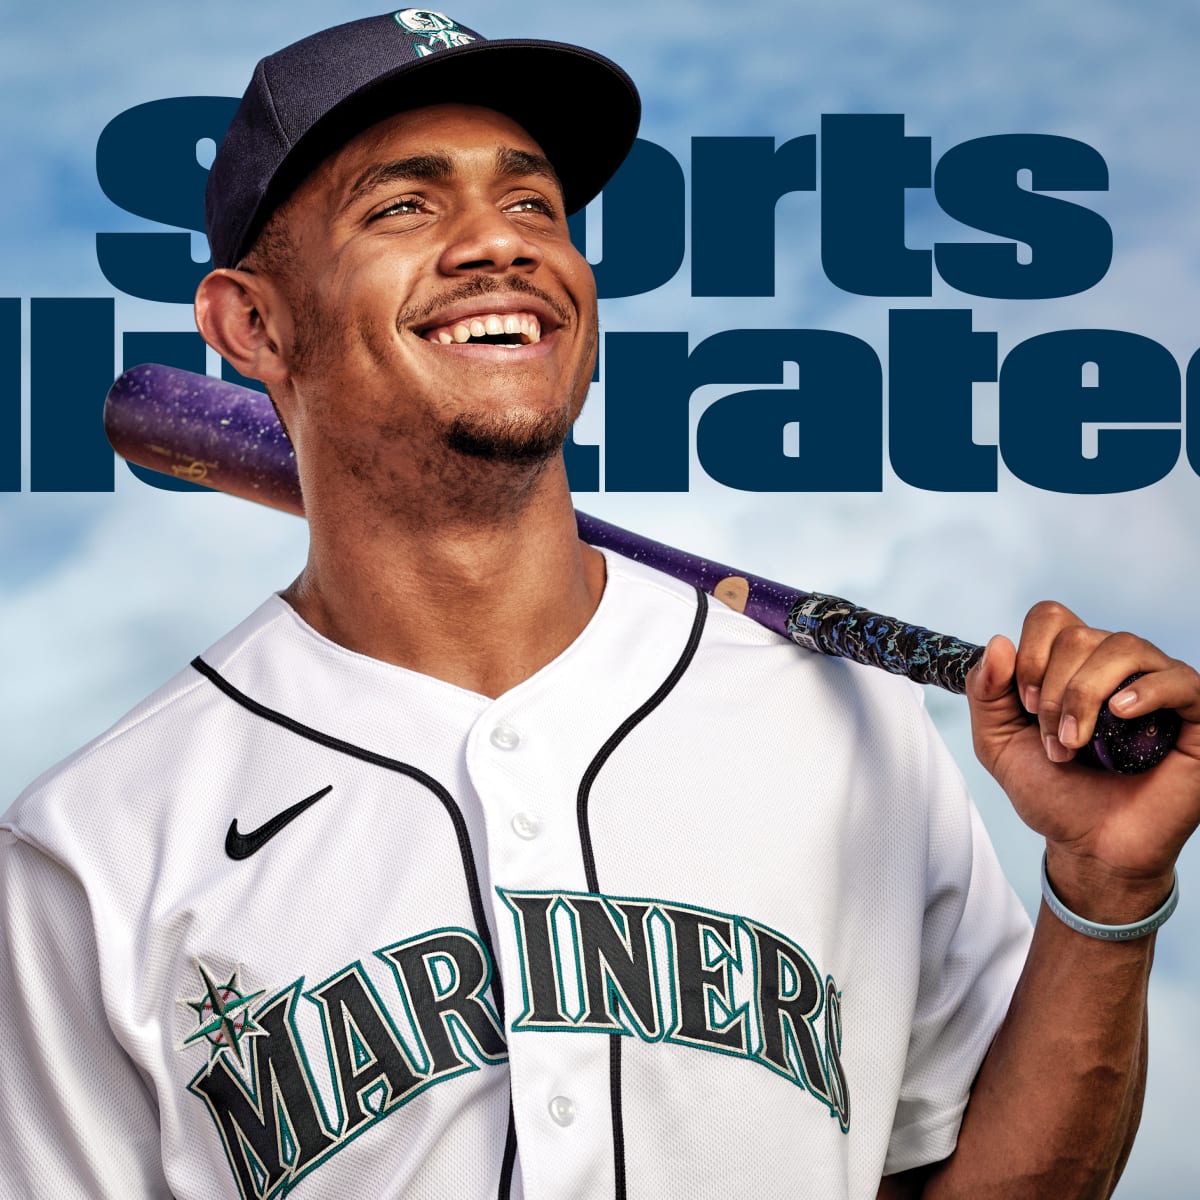 The Seattle Mariners are getting a new uniform look for spring training 